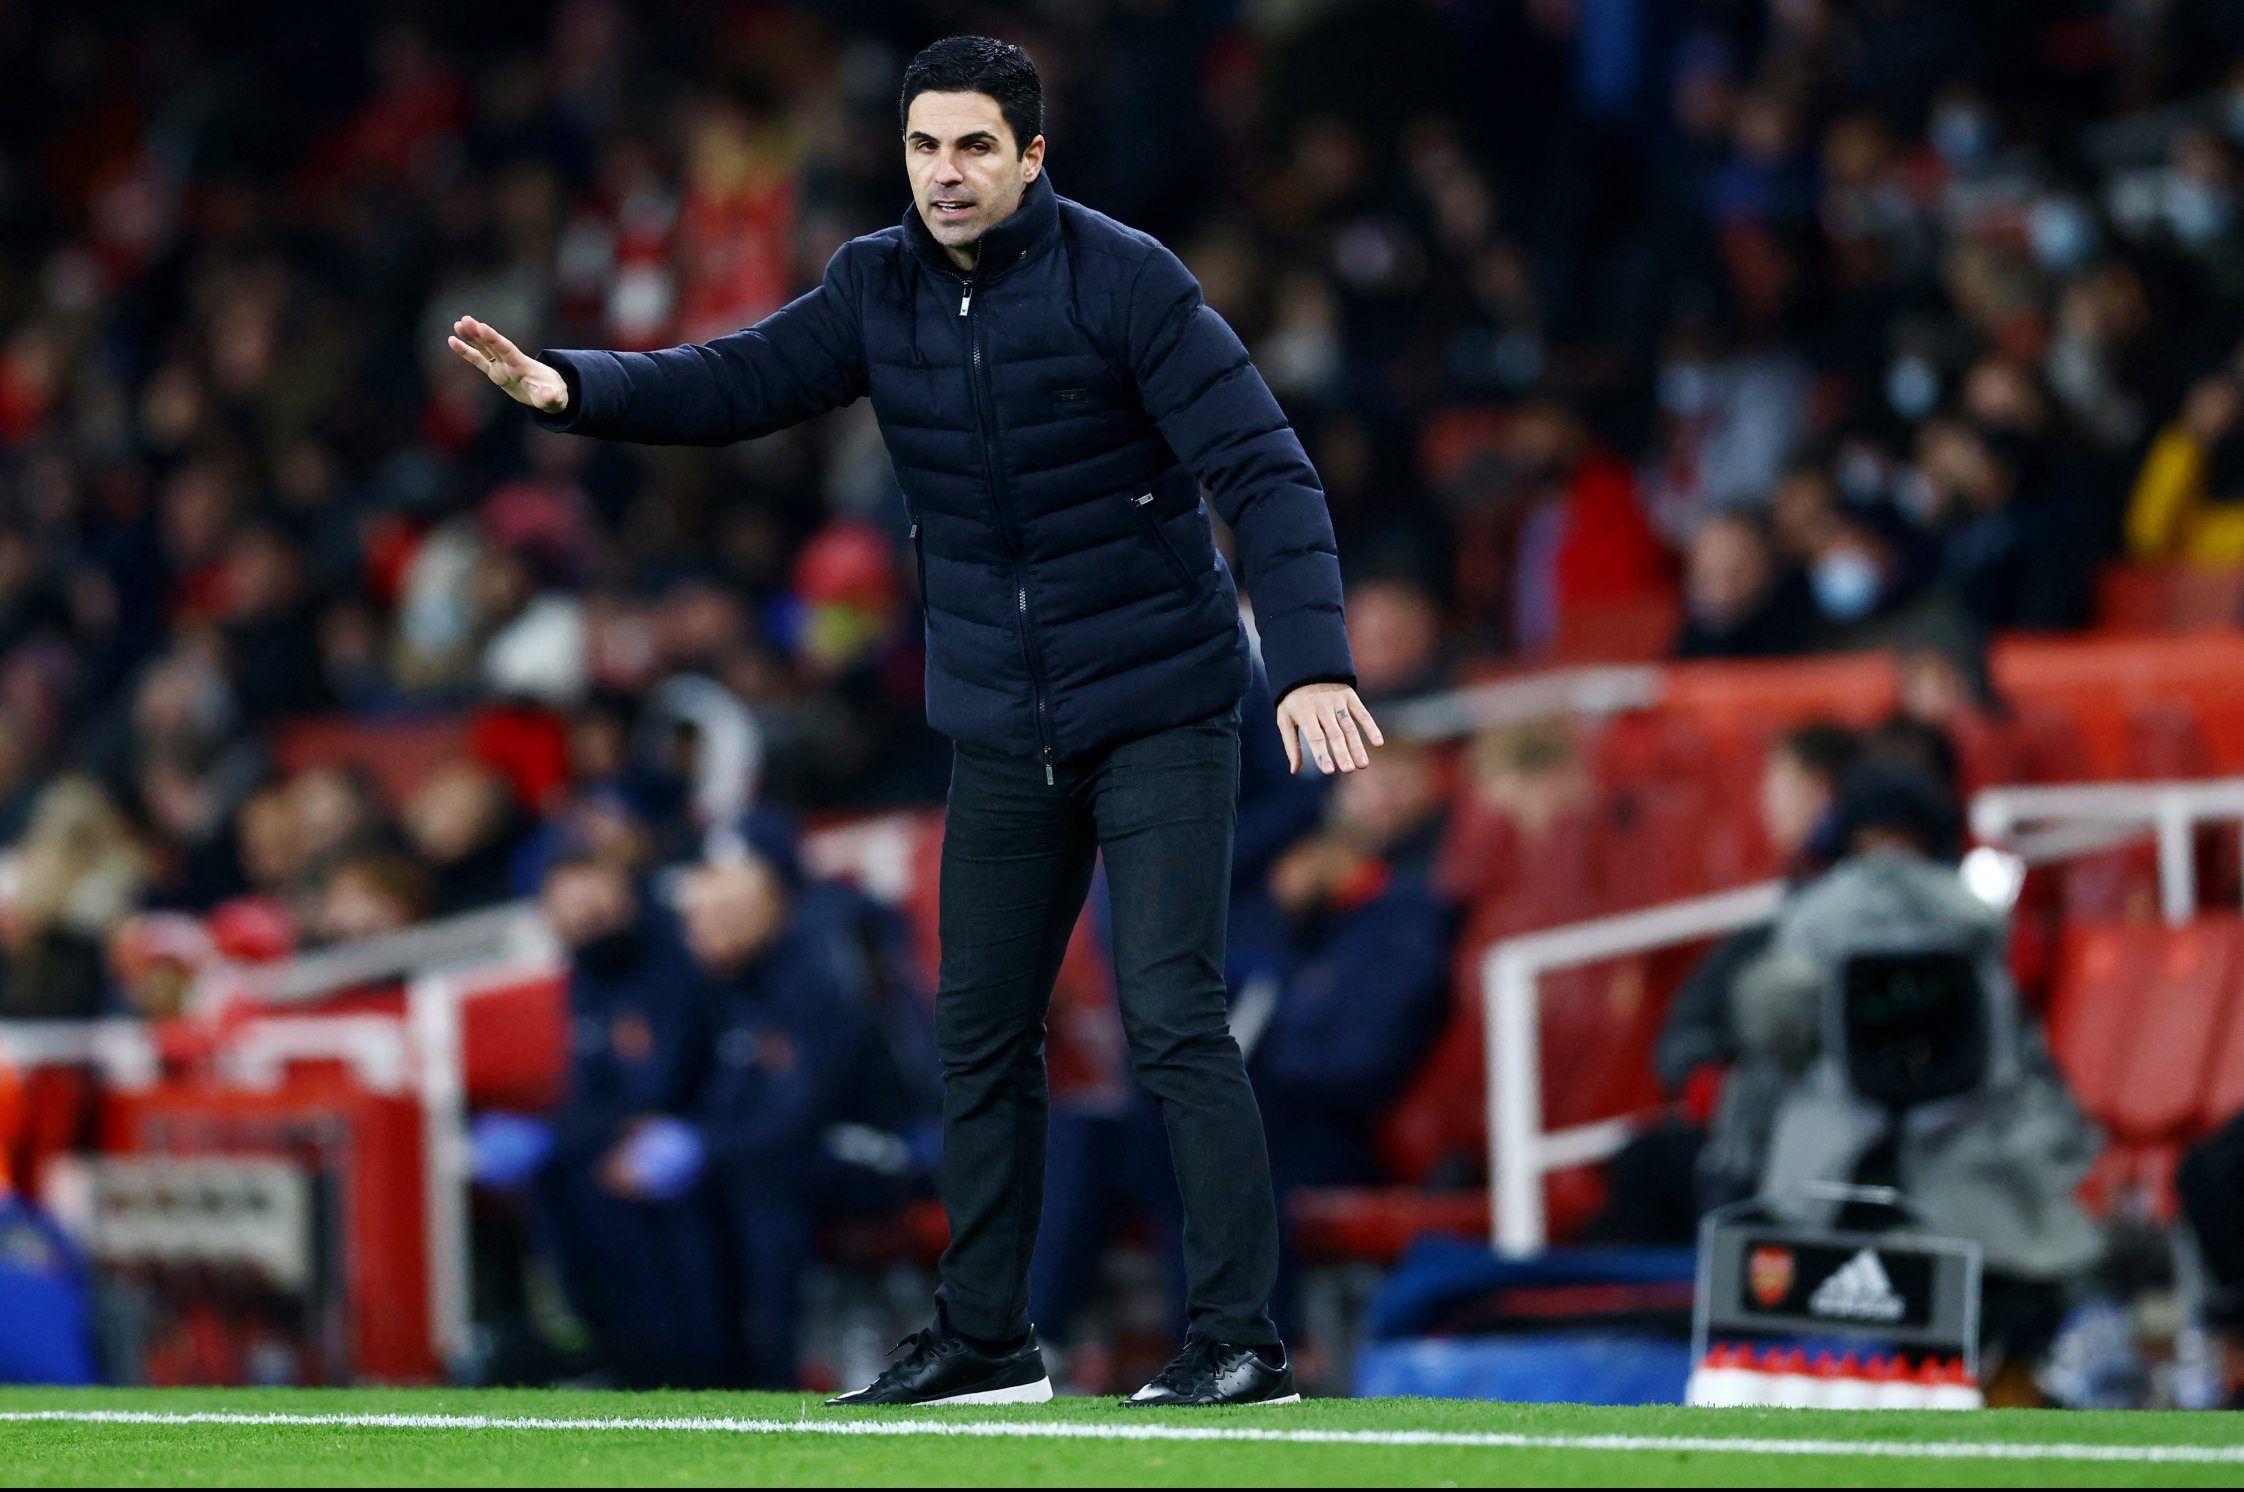 Arsenal manager Mikel Arteta on the sideline against Sunderland in Carabao Cup quarter-final